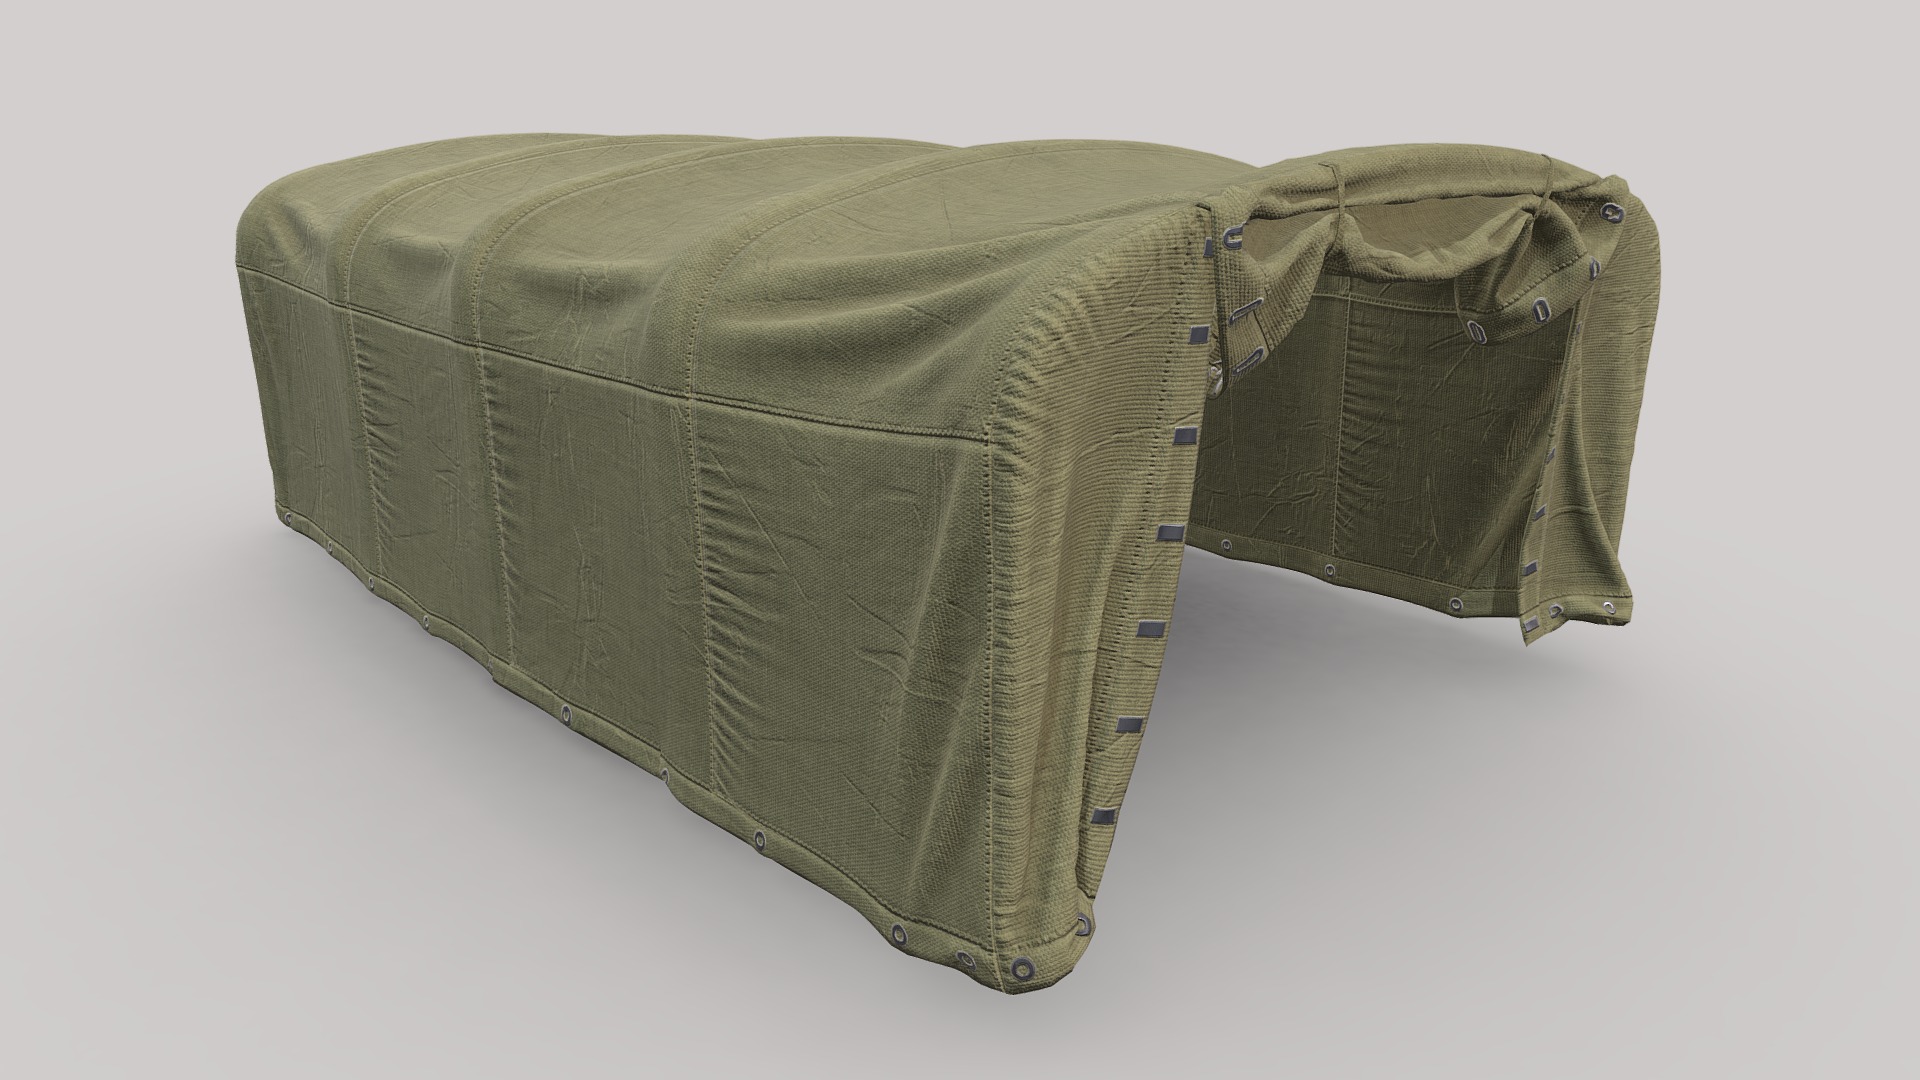 3D model Tent ZIL-157 - This is a 3D model of the Tent ZIL-157. The 3D model is about a pair of shorts.